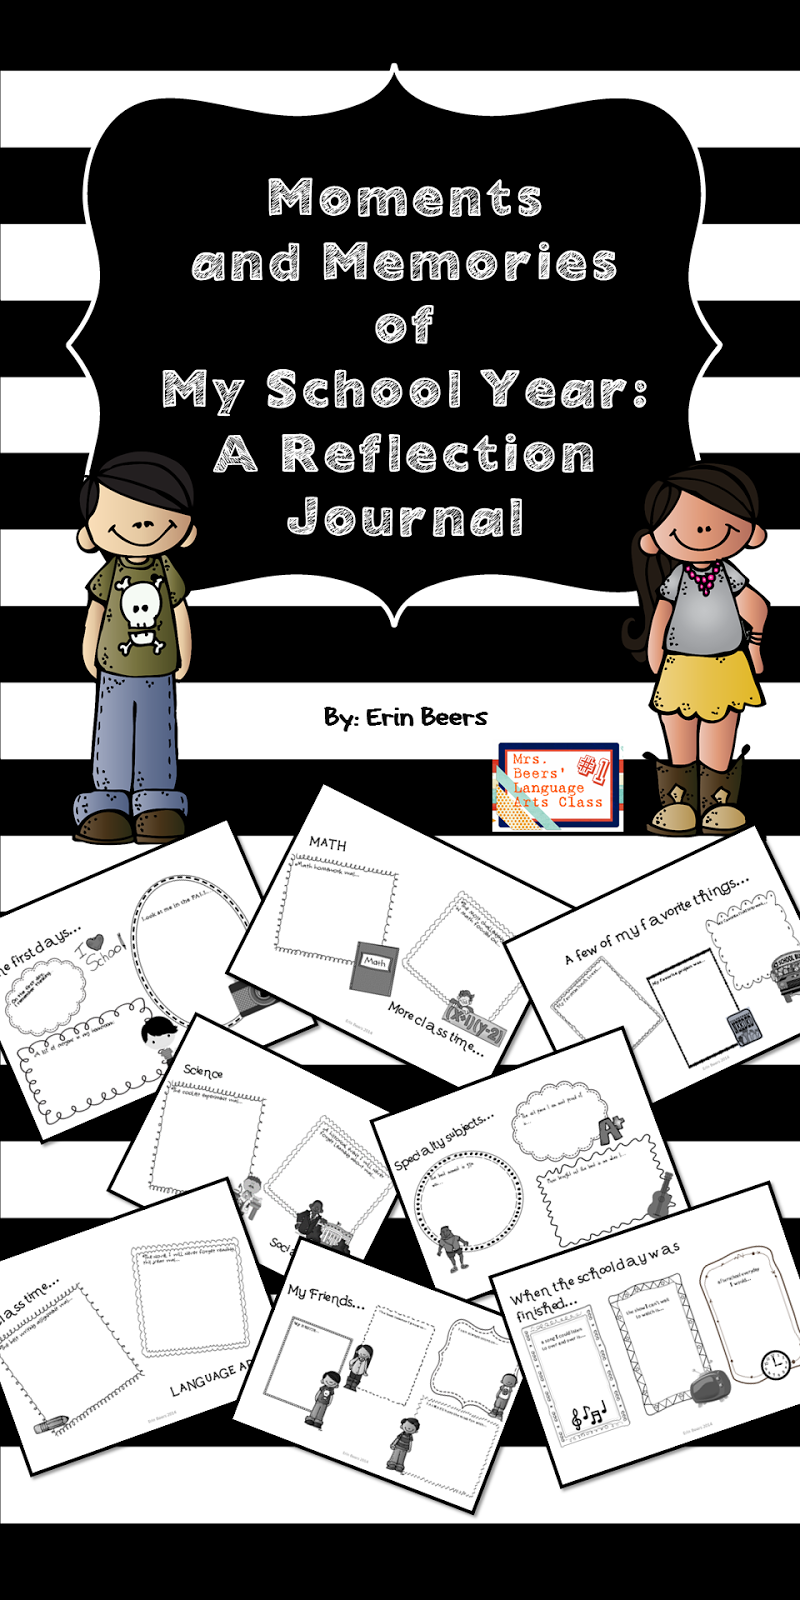 http://www.teacherspayteachers.com/Product/Memories-of-My-School-Year-NO-PREP-End-of-Year-Student-Reflection-Journal-1136893